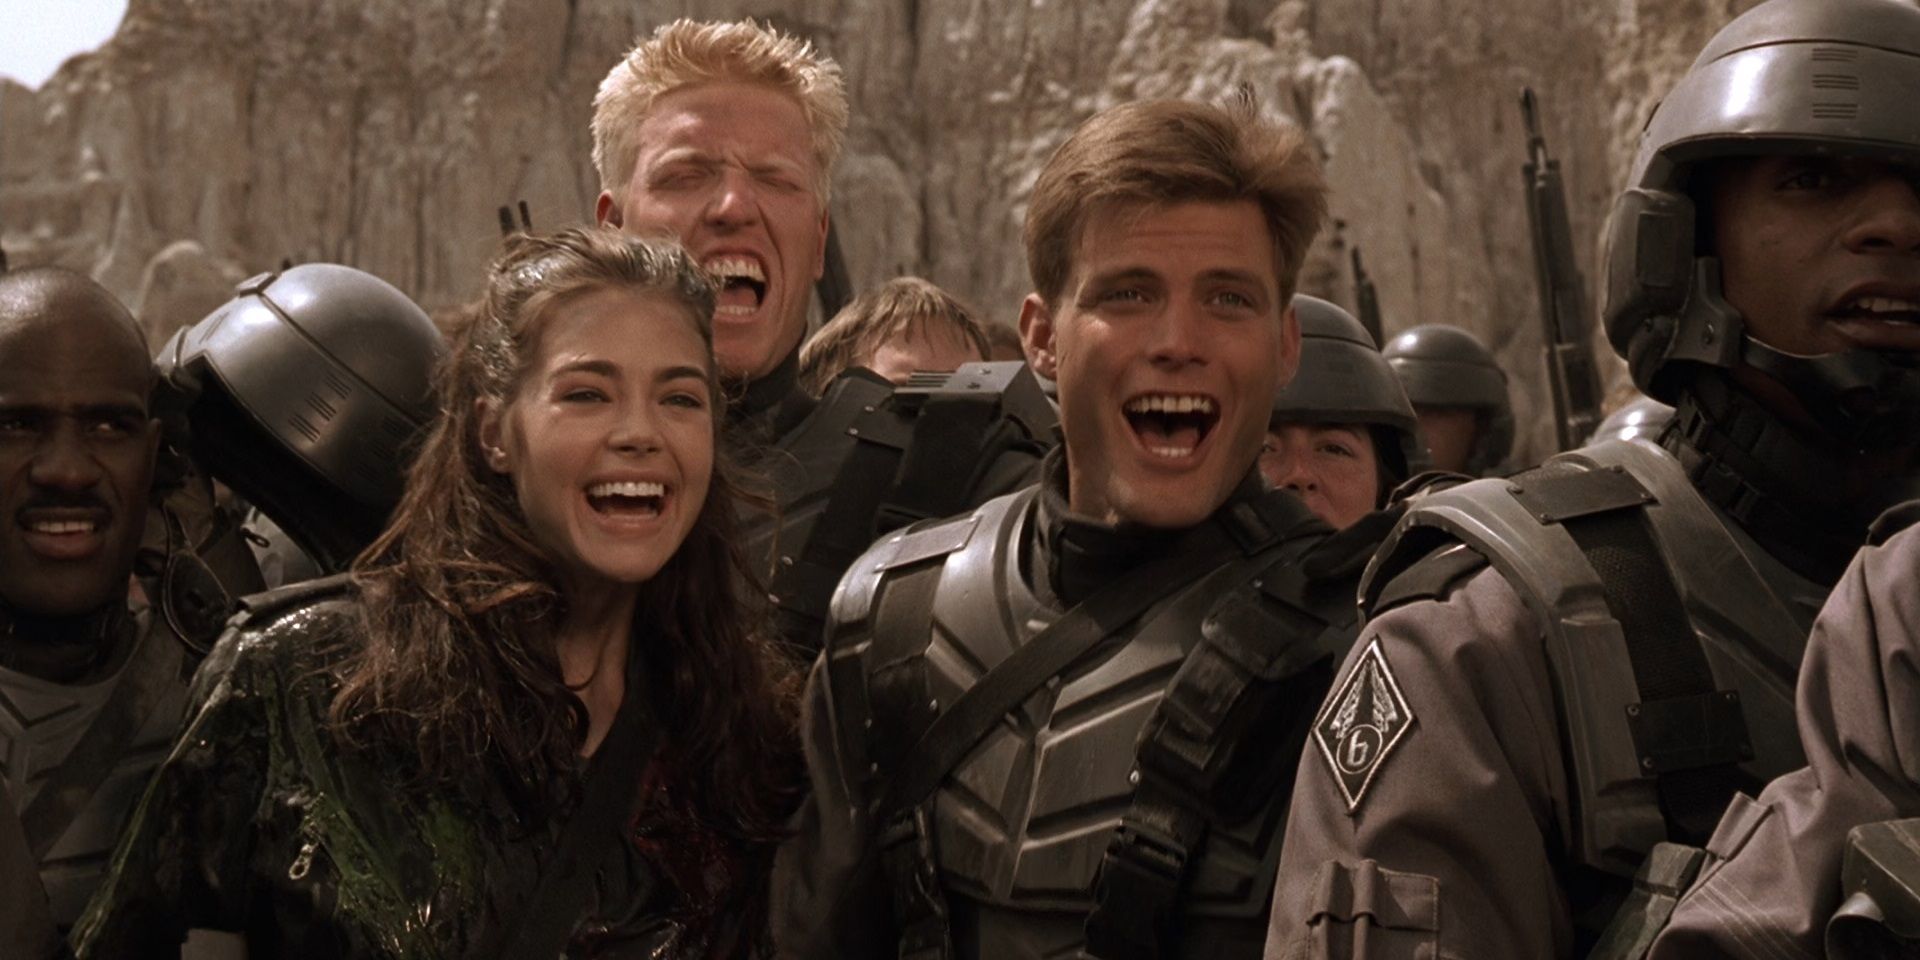 The main cast of Starship Troopers